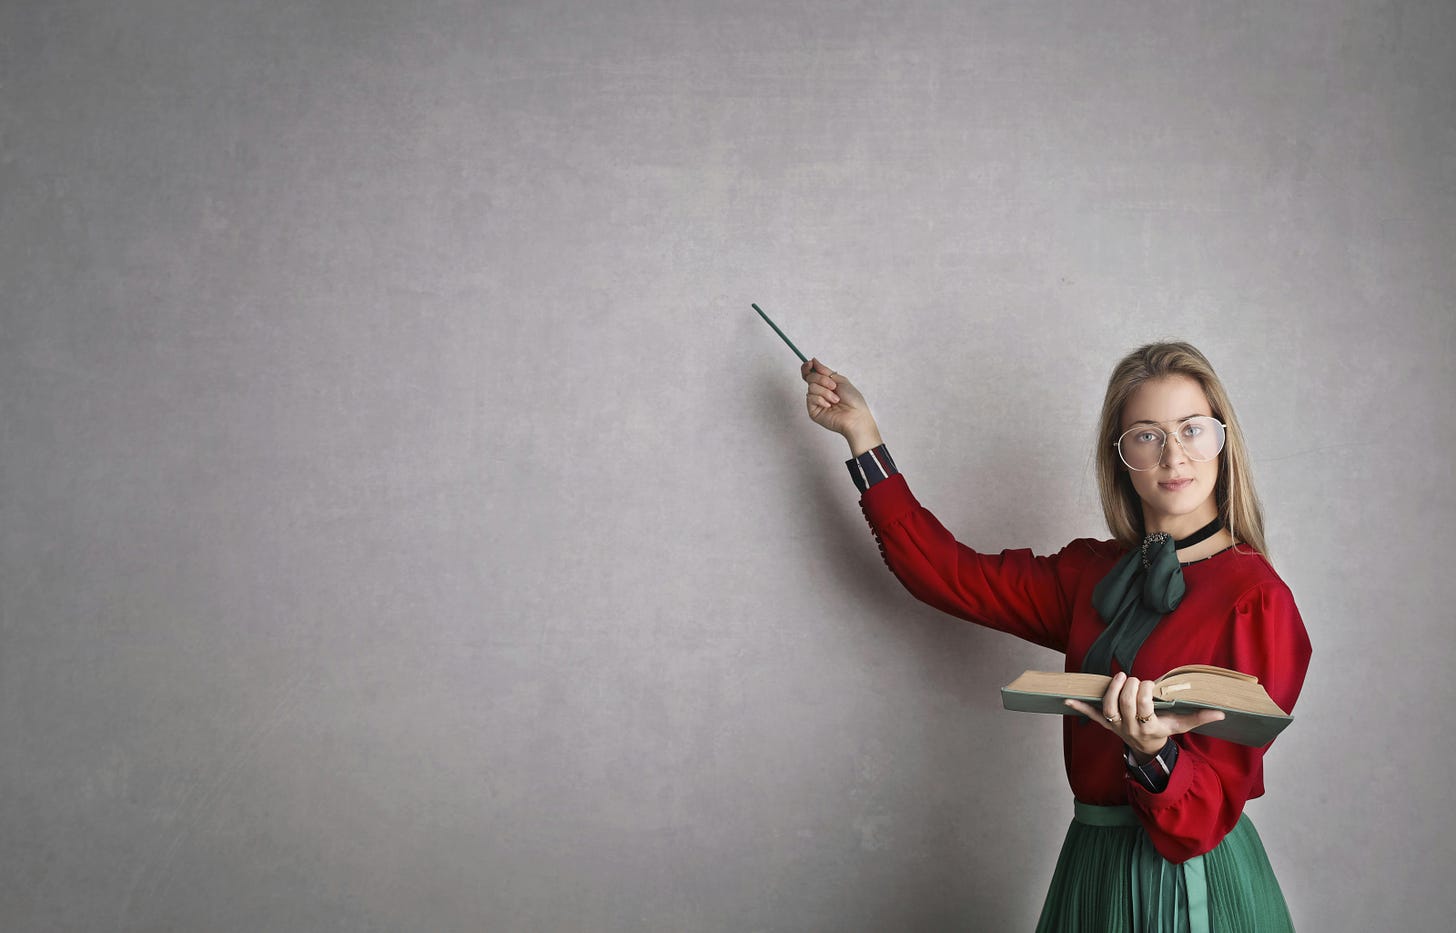 photo entitled "Woman in Discussing A Lesson Plan." she is dressed conservatively, holding a large open book in her left hand. she is holding a pointer in her right hand, which gestures at what appears to be a large blackboard where all the previous writings/markings have been erased.